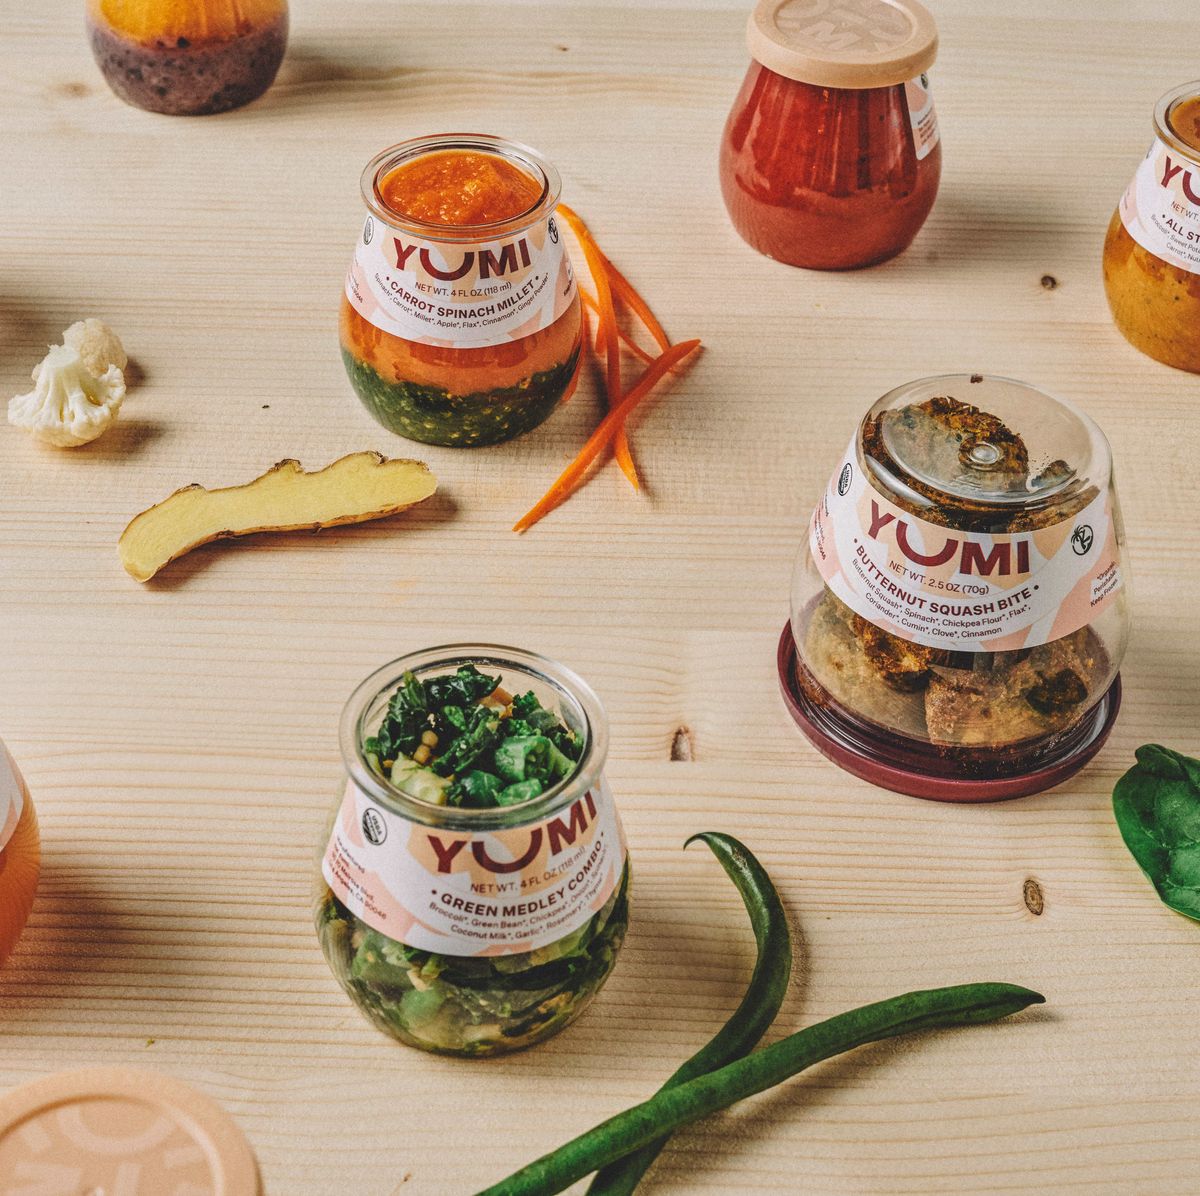 assorted baby food jars from yumi, a good housekeeping best kids meal delivery service